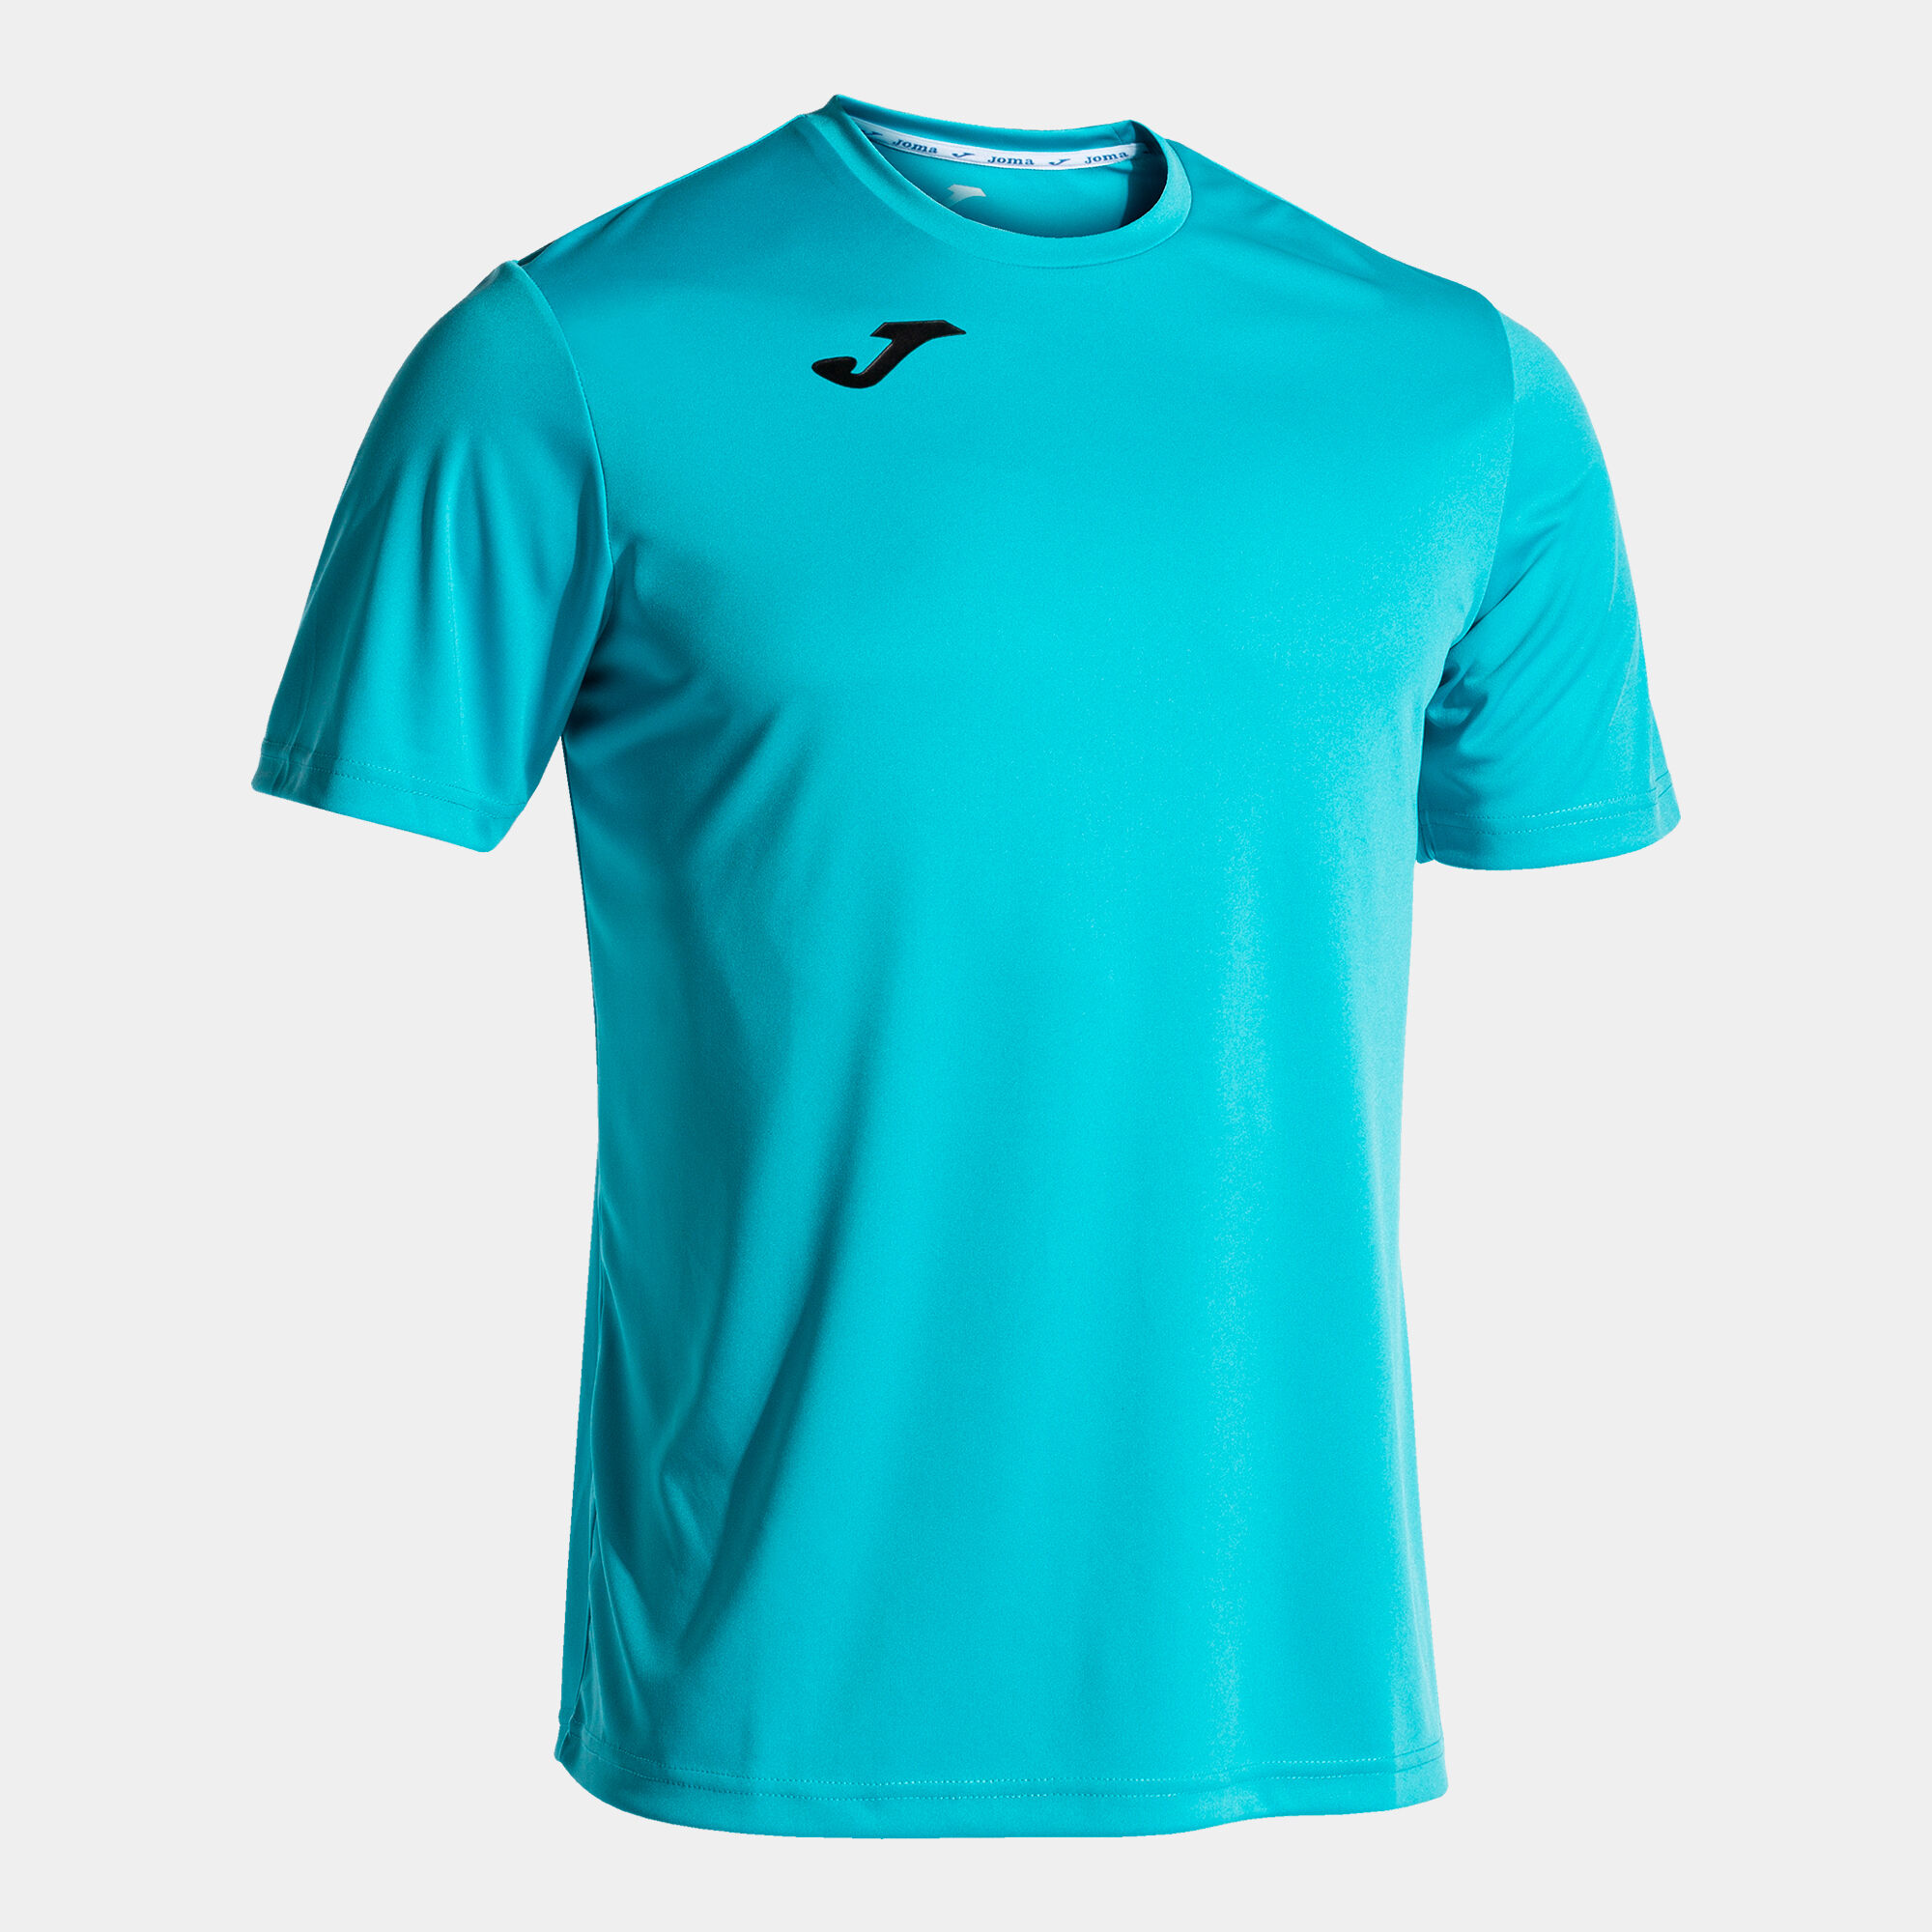 Maillot manches courtes homme Combi turquoise fluo